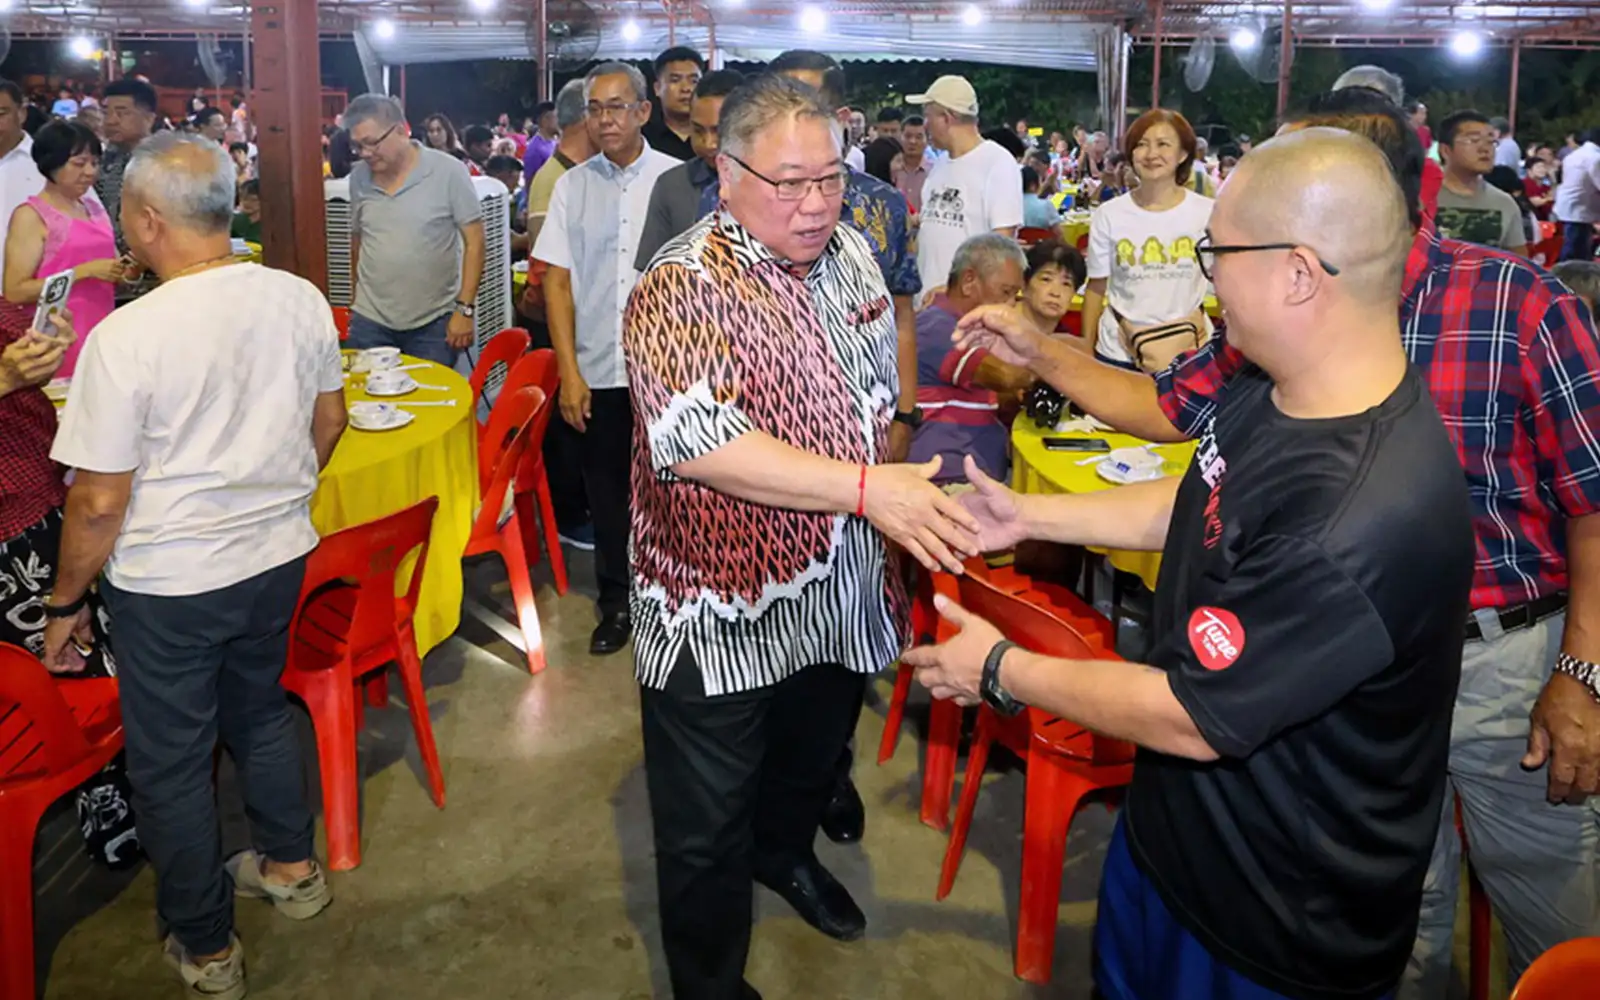 back pang but vote her out if she doesn’t perform, says tiong